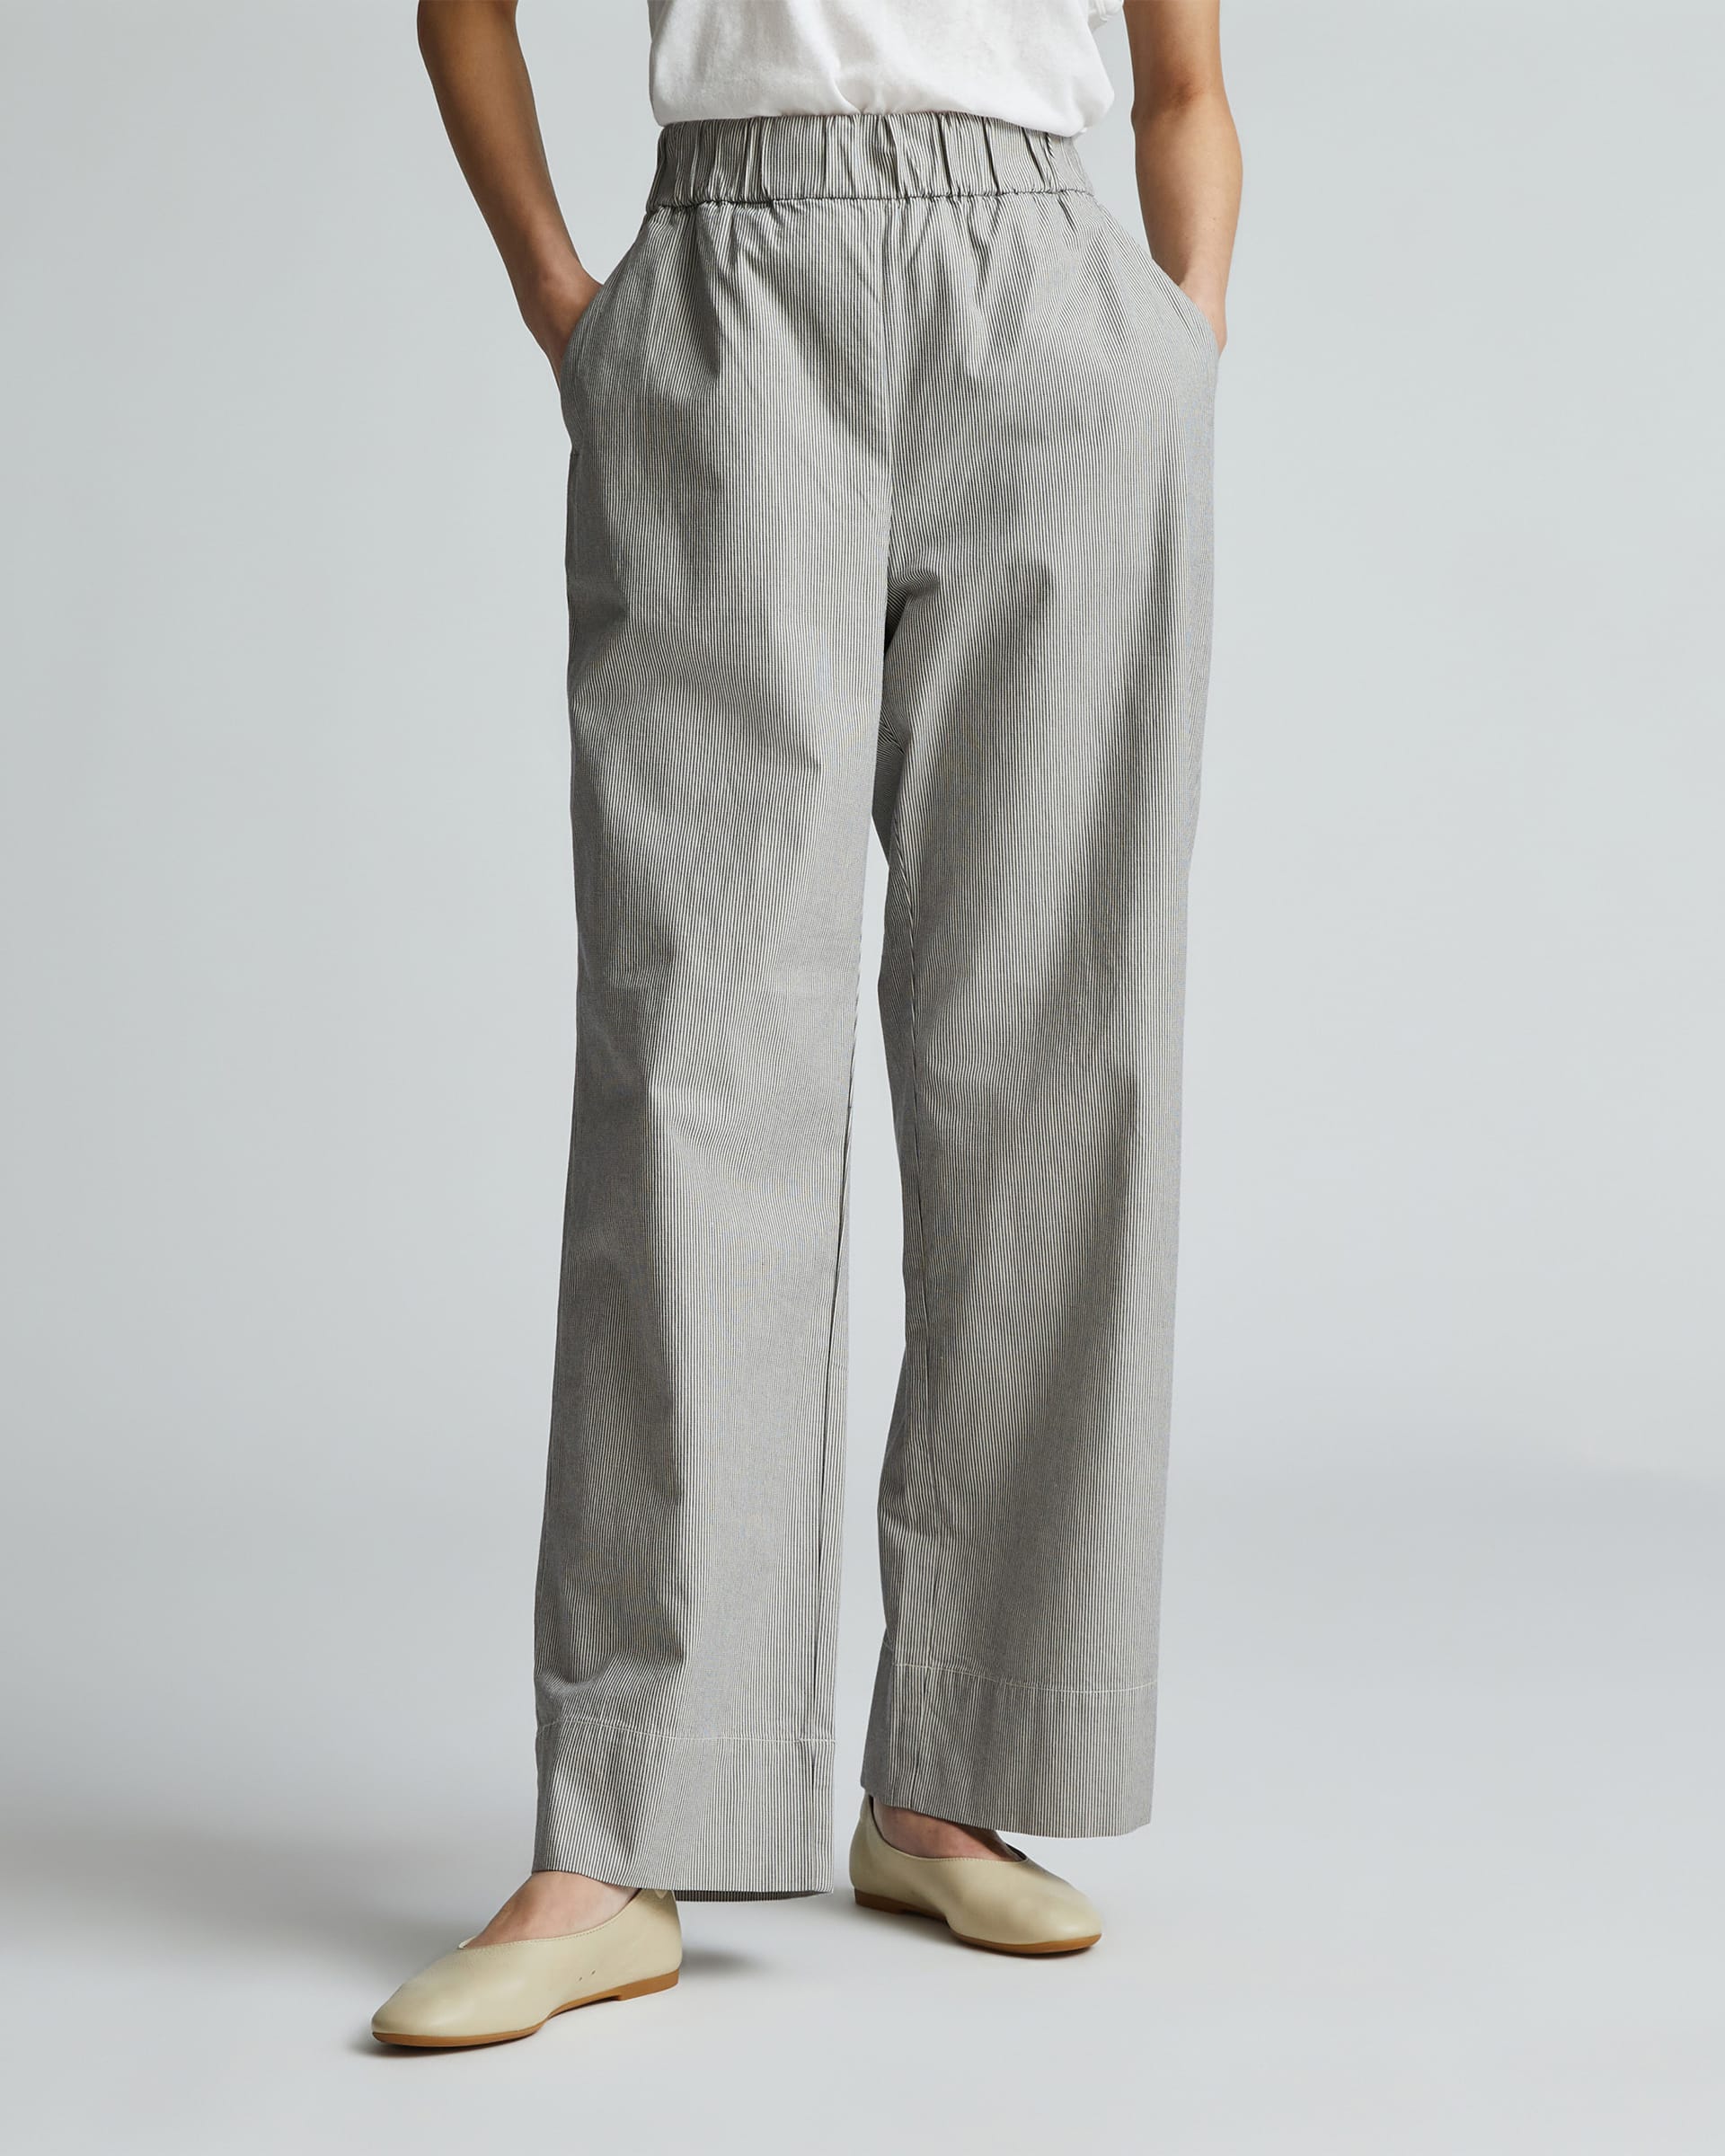 The Easy Pant Canvas Tan / Navy – Everlane